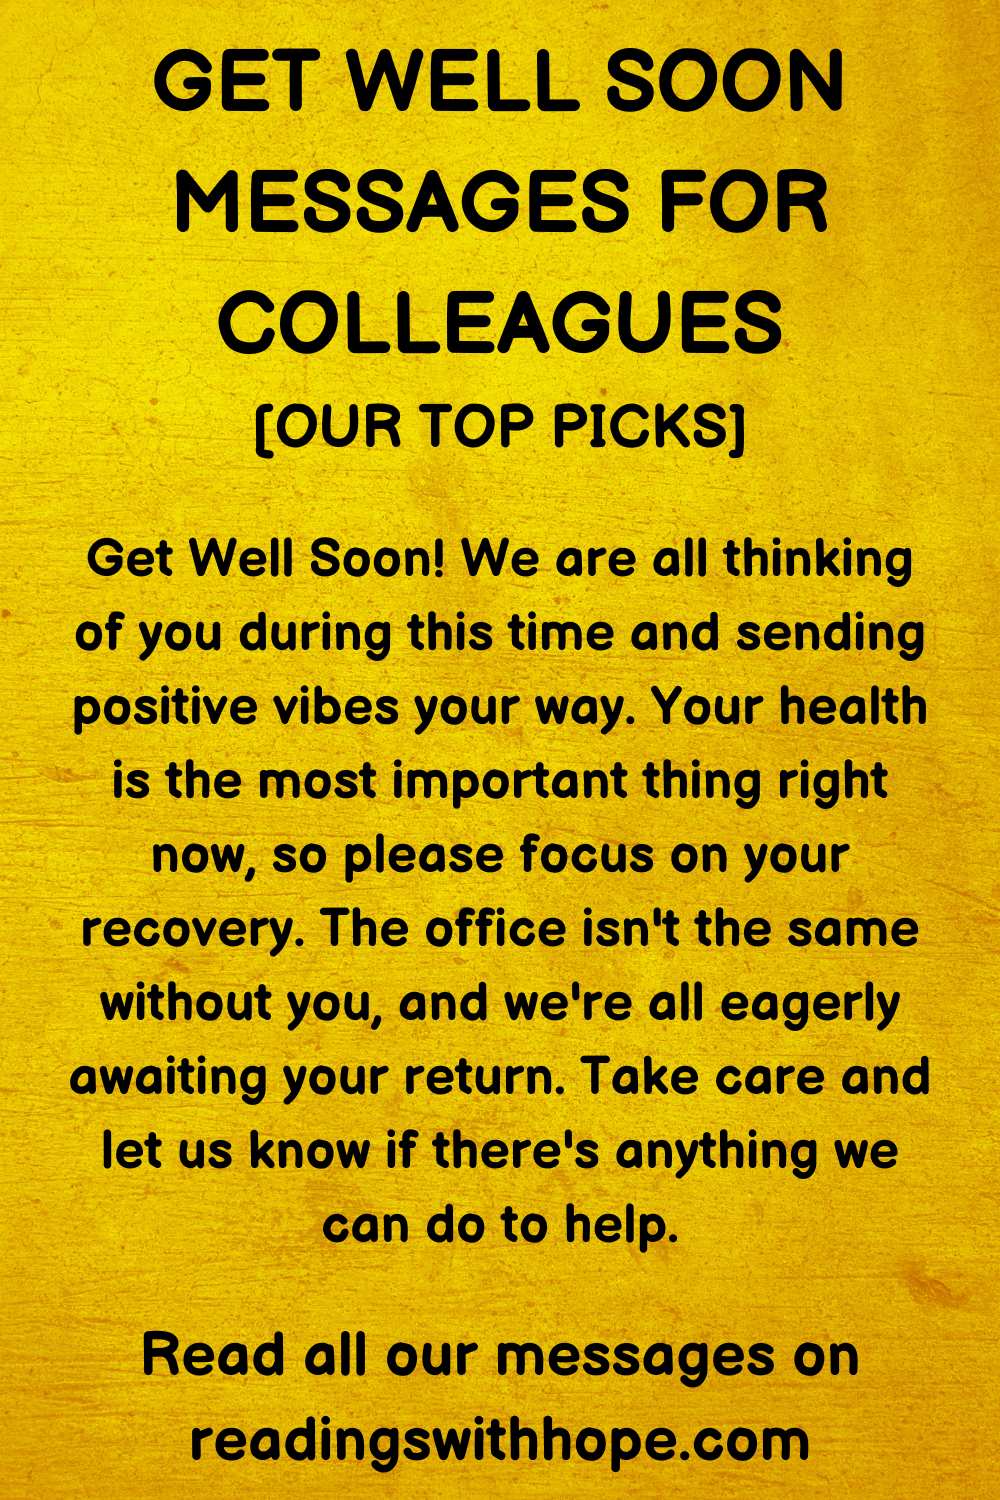 Get Well Soon Message for Colleagues
